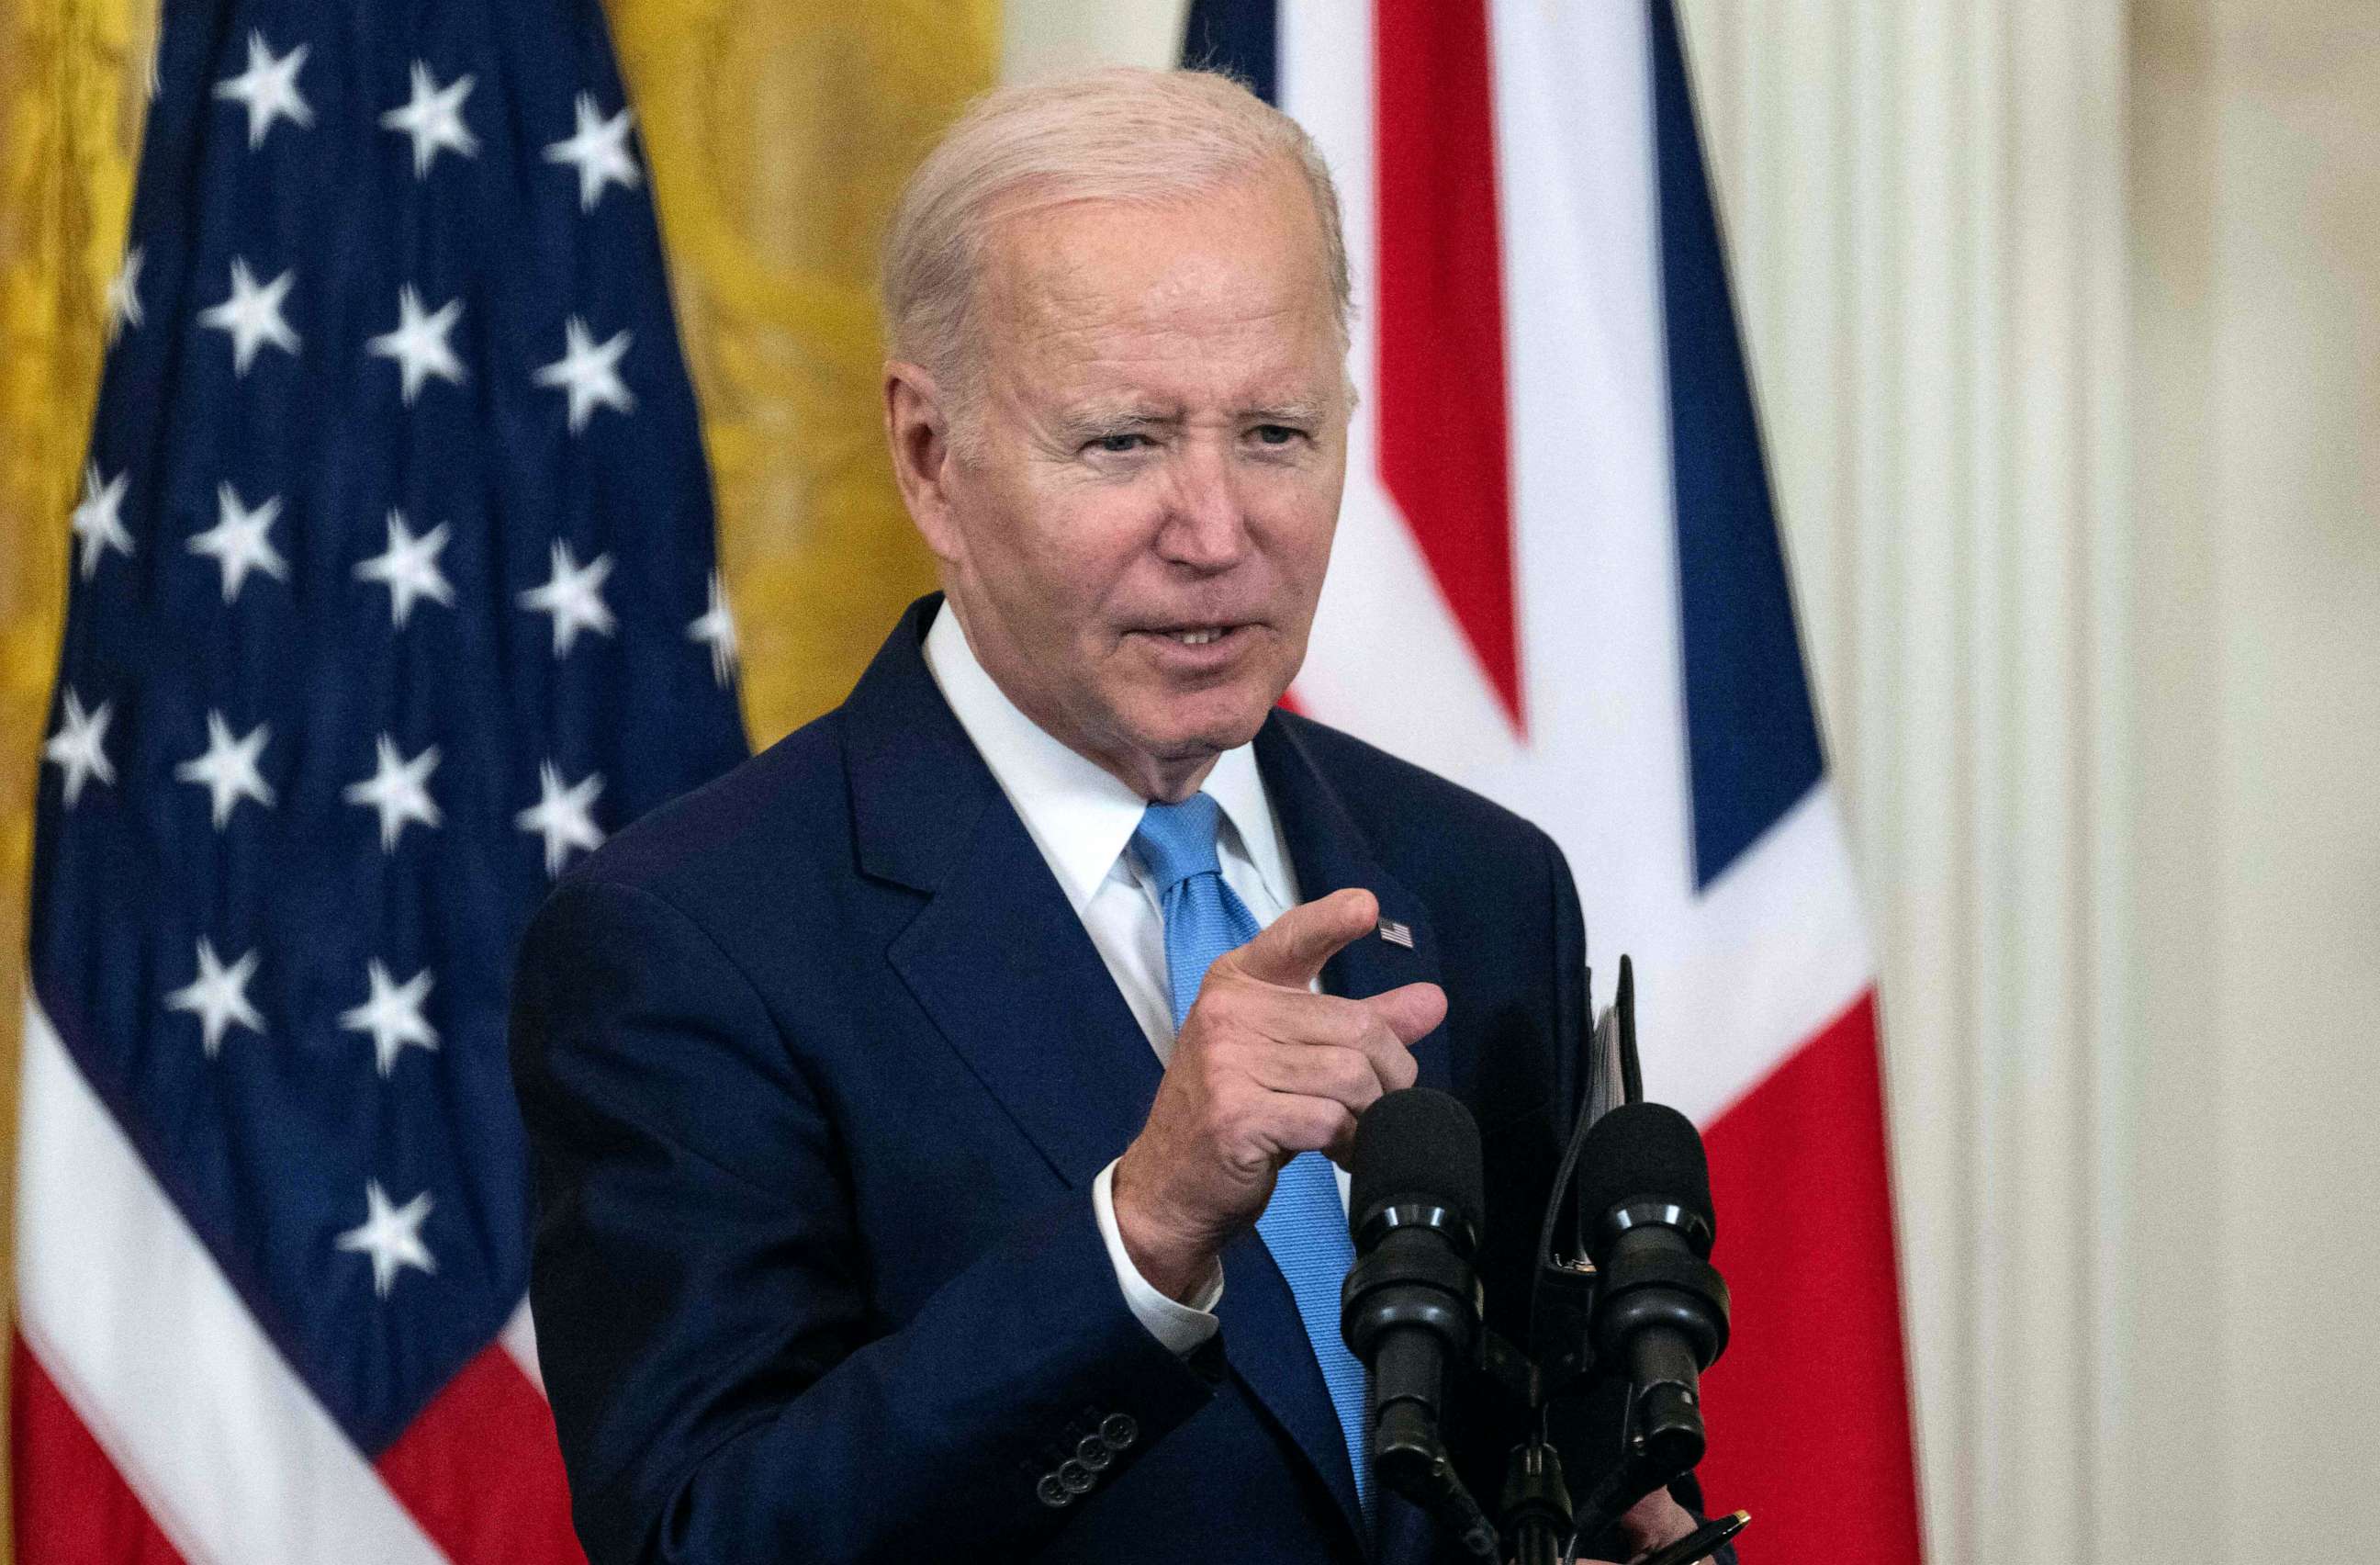 PHOTO: President Joe Biden takes part in a joint-press conference with British Prime Minister Rishi Sunaka in the East Room of the White House in Washington, DC, June 8, 2023.